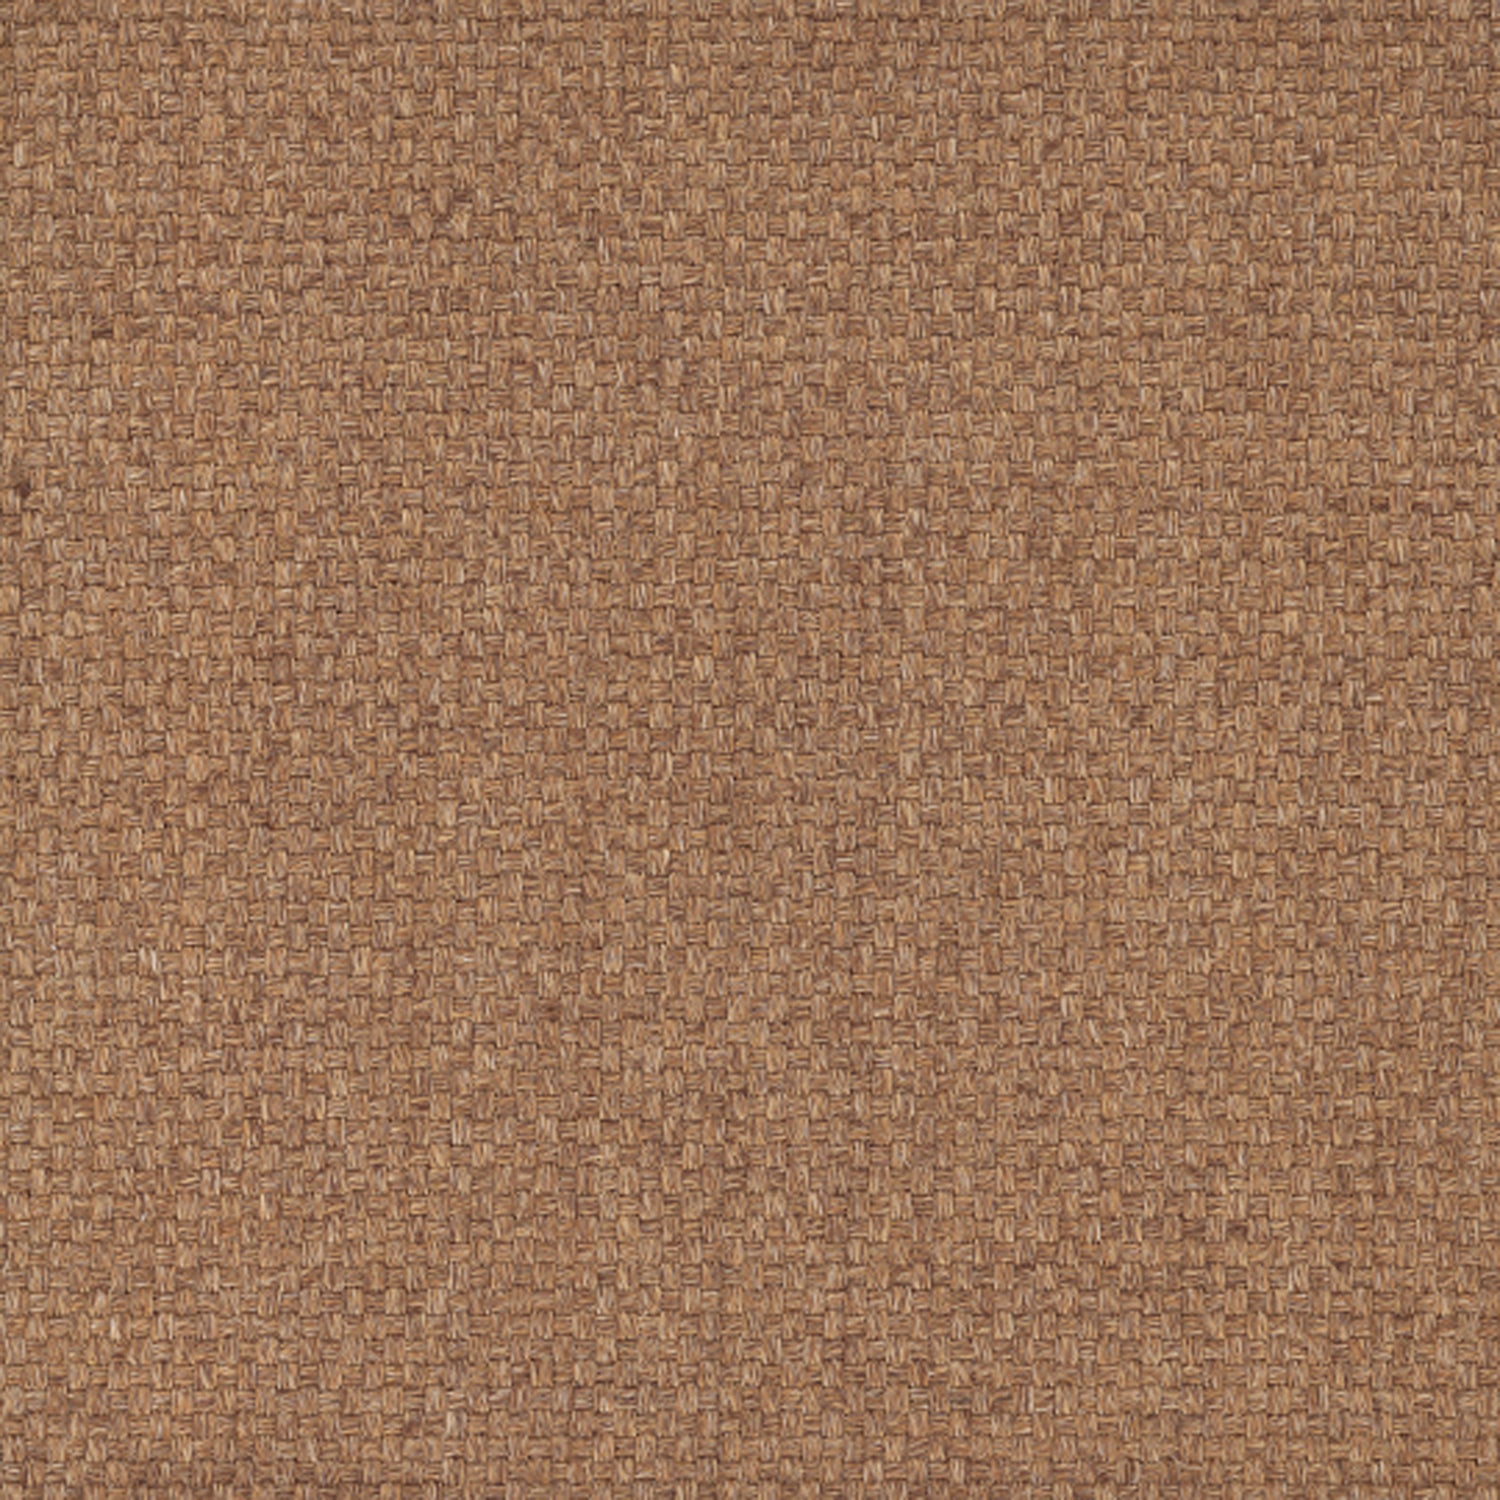 Sisal broadloom carpet swatch in a chunky grid weave in taupe.